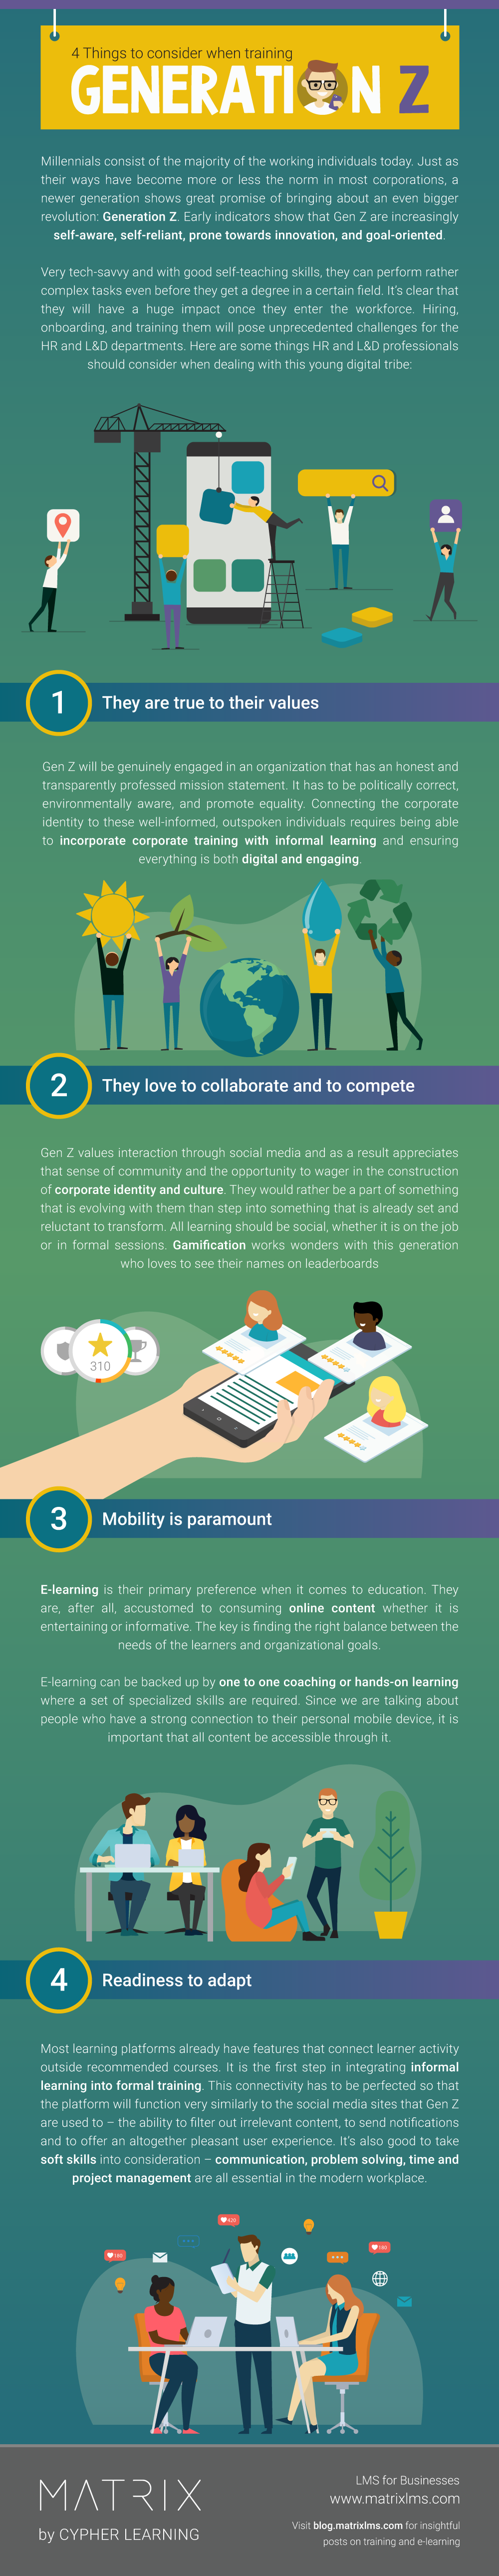 4-things-to-consider-when-training-generation-z infographic | Business Blog